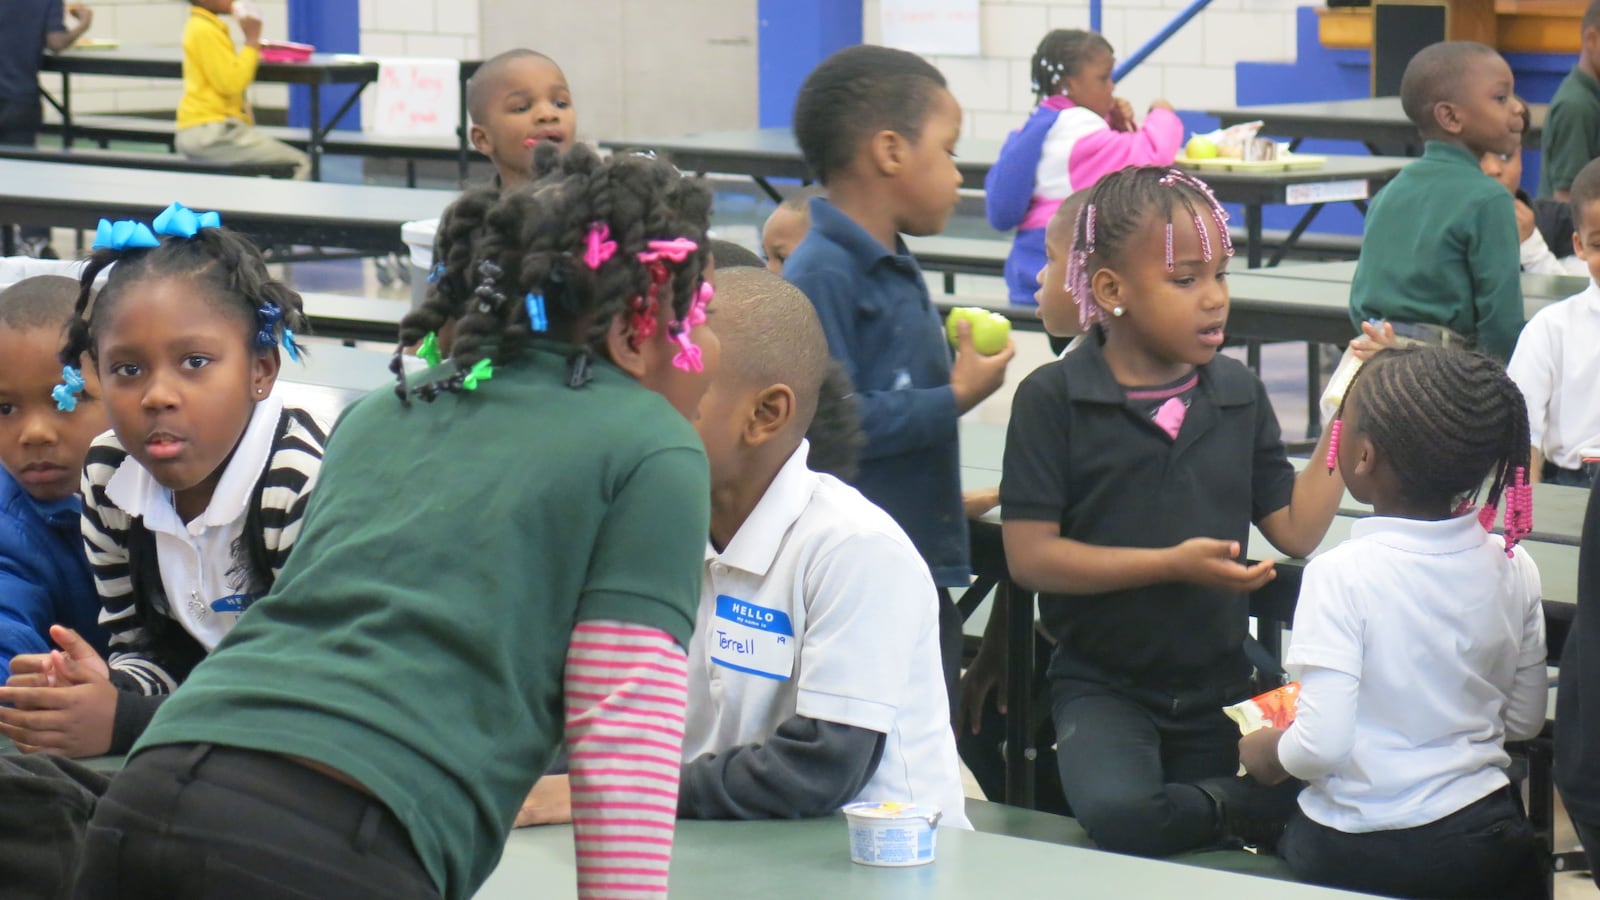 Students settle in to lunch at Aspire Hanley Elementary, a school in the ASD located in Orange Mound.